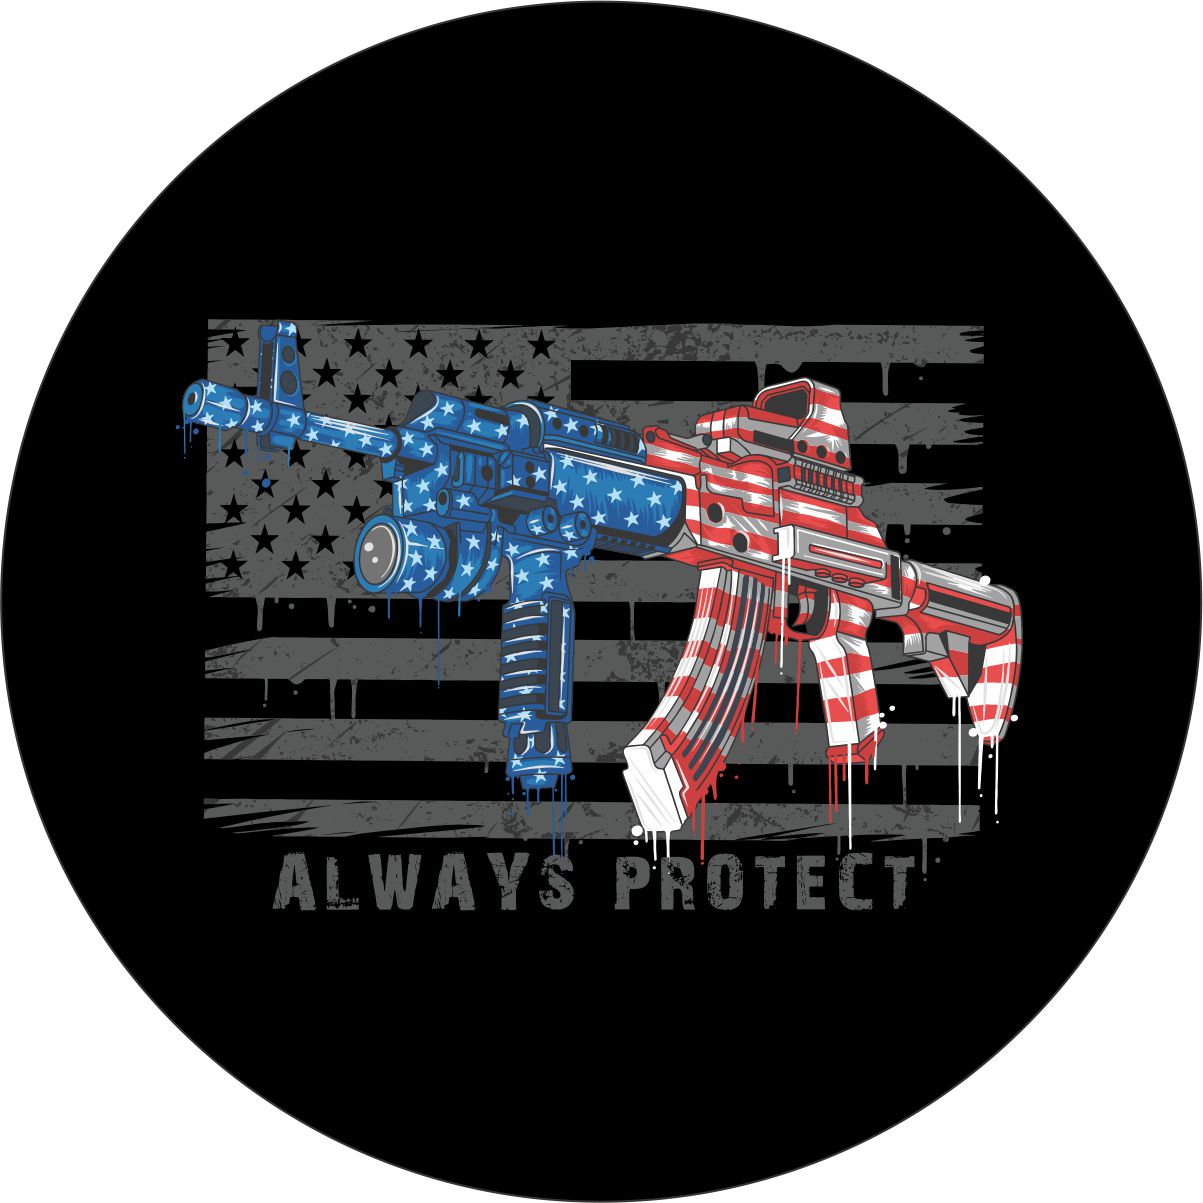 Always protect American, freedom, and 2nd amendment spare tire cover design on black vinyl for Jeep, RV, camper, Bronco, and more.